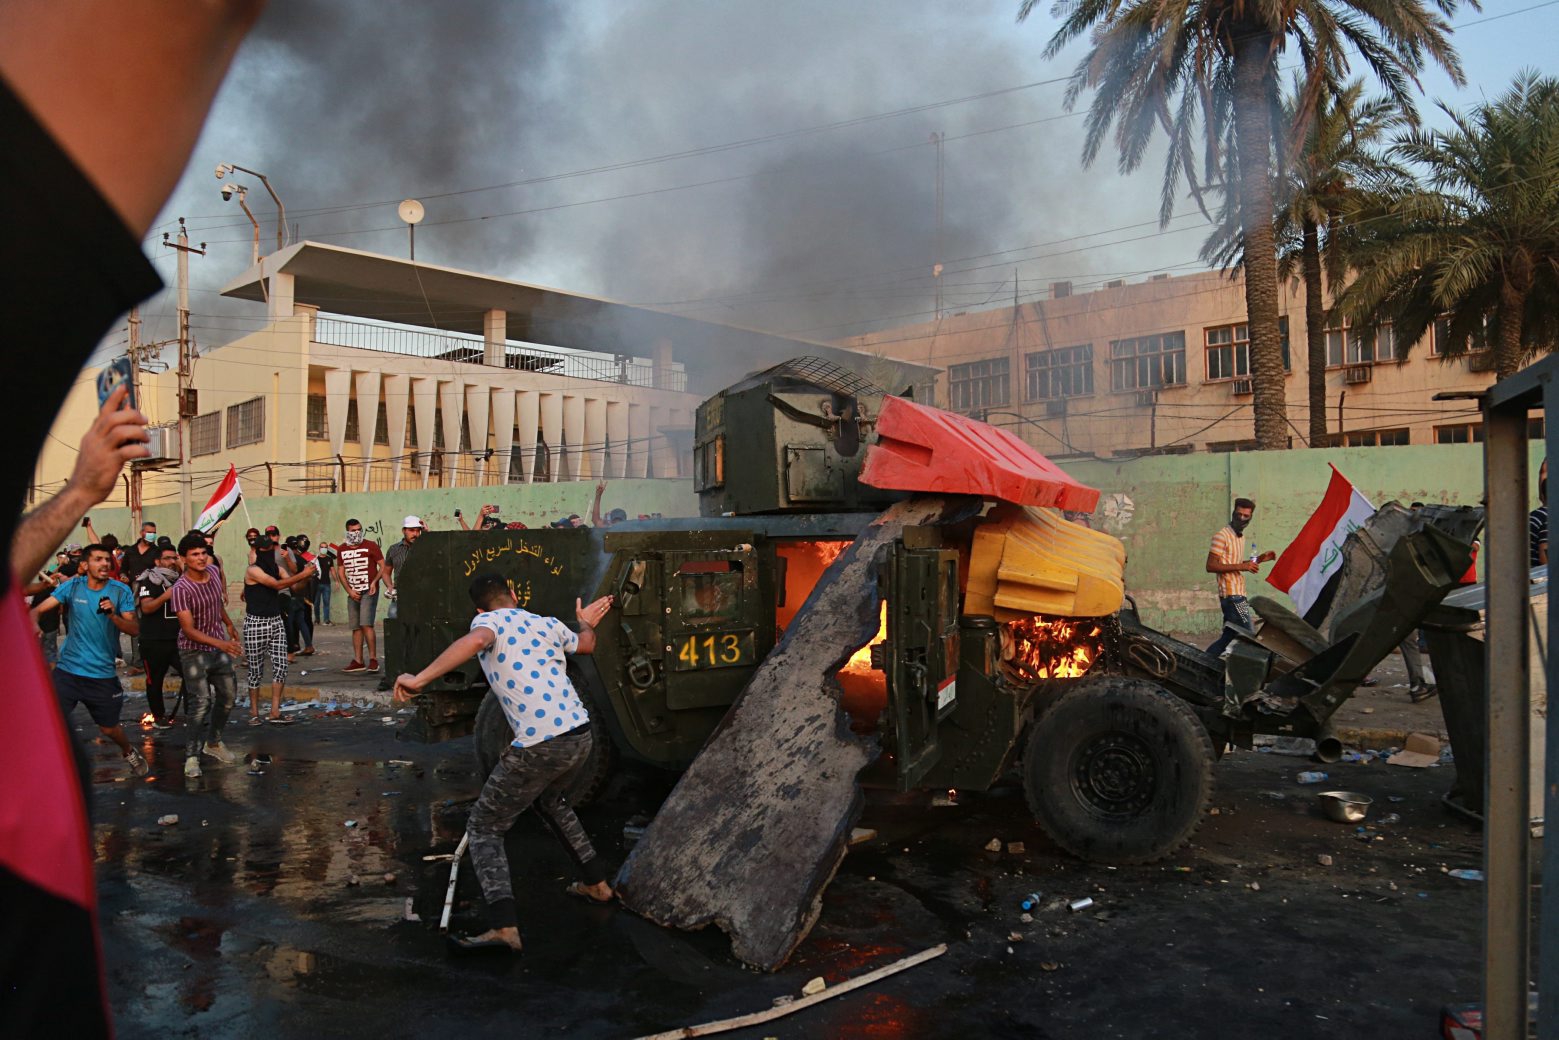 Anti-government protesters burn an armored vehicle belonging to the Federal Police Rapid Response Forces during a protest in Baghdad, Iraq, Thursday, Oct. 3, 2019. Iraqi security forces fired live bullets into the air and used tear gas against a few hundred protesters in central Baghdad on Thursday, hours after a curfew was announced in the Iraqi capital on the heels of two days of deadly violence that gripped the country amid anti-government protests that killed over 19 people in two days. (AP Photo/Hadi Mizban) Iraq Protests